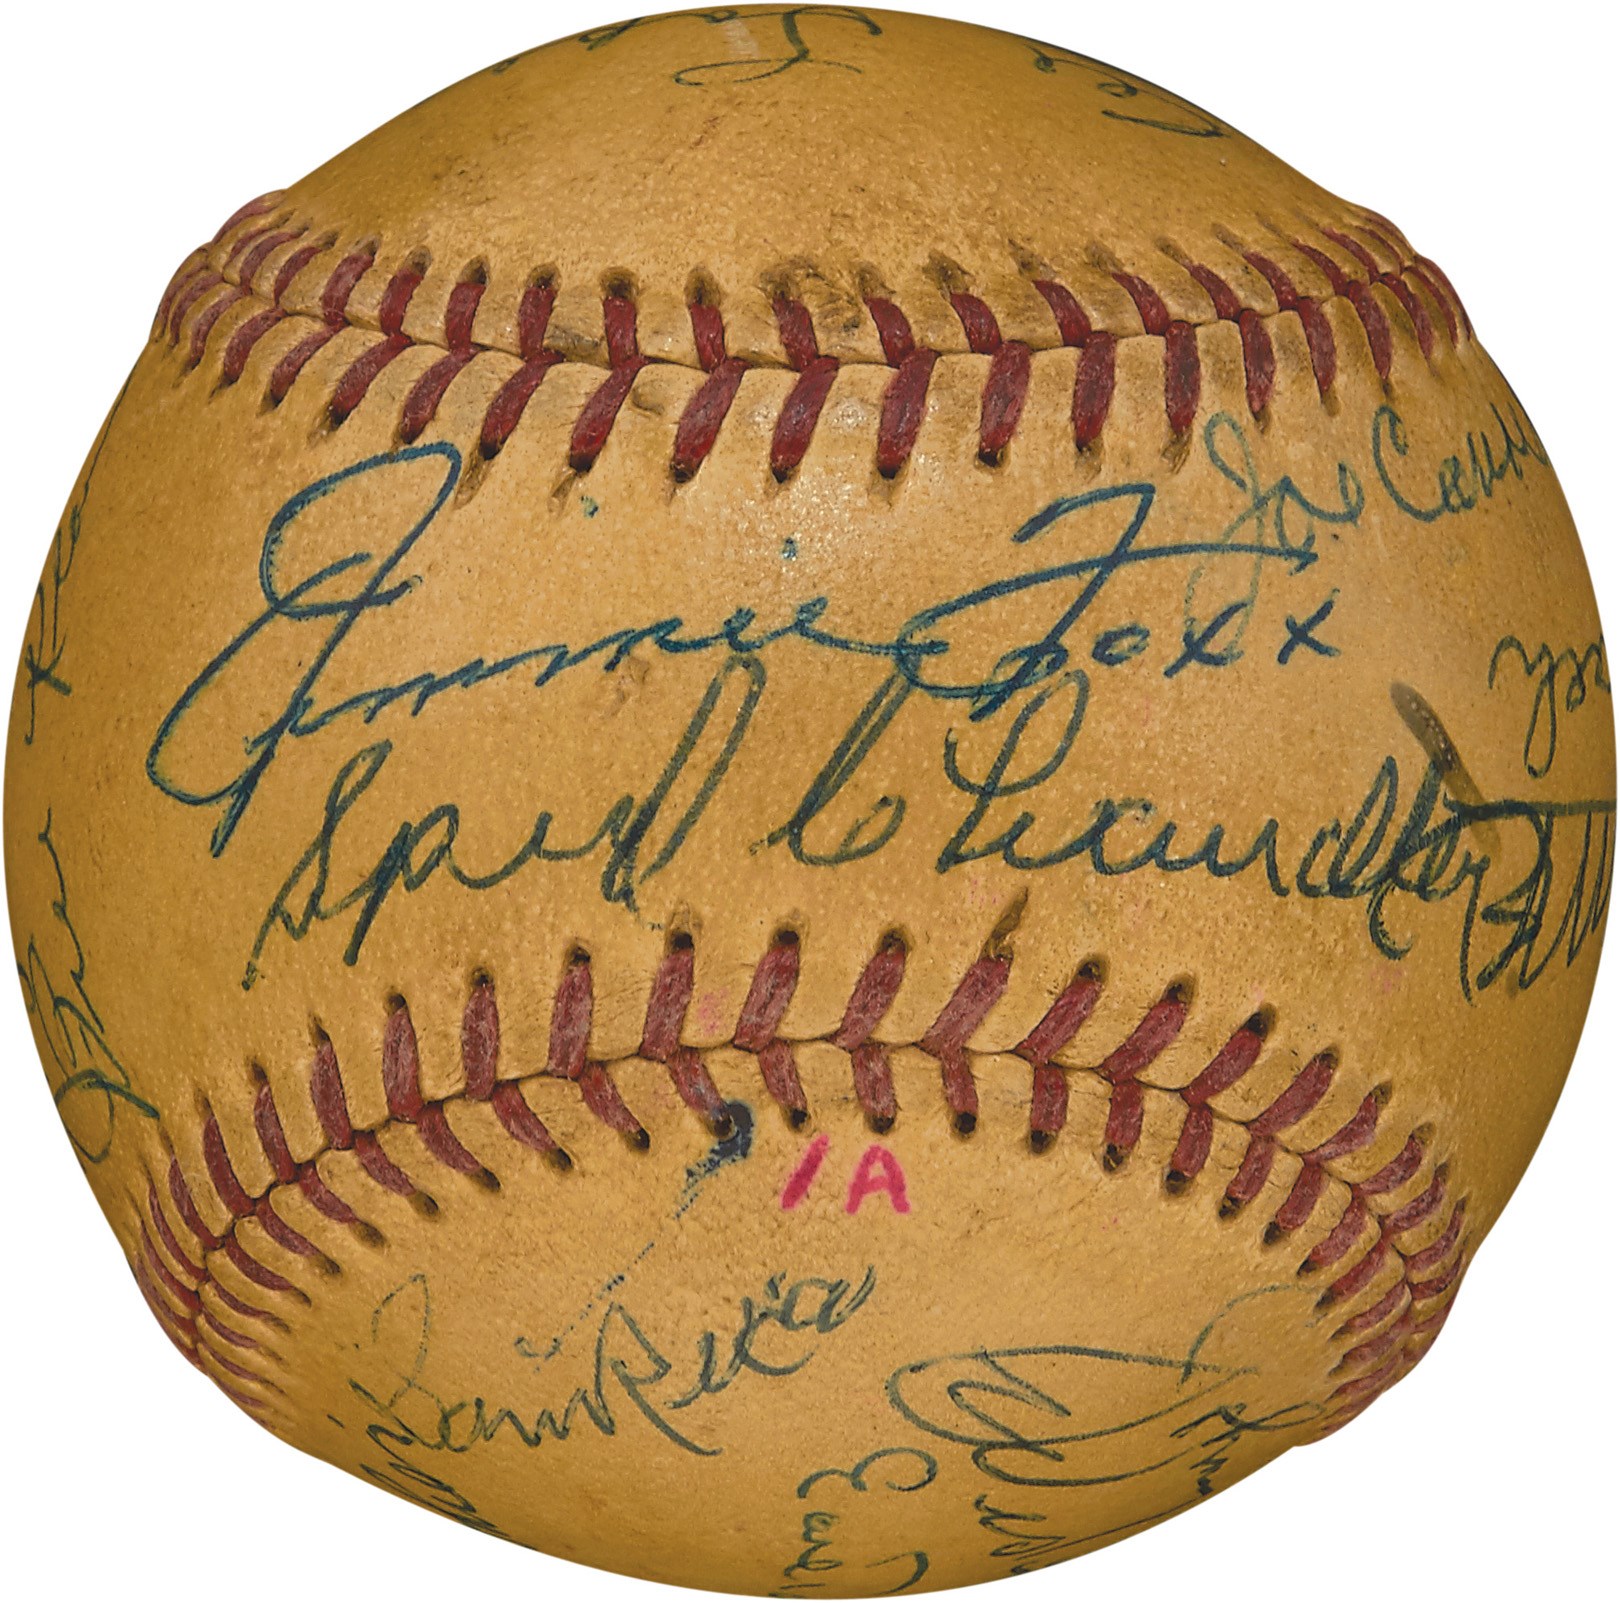 The John O'connor Signed Baseball Collection - 1956 "March of Dimes" Old Timers Day Signed Baseball w/Jimmie Foxx